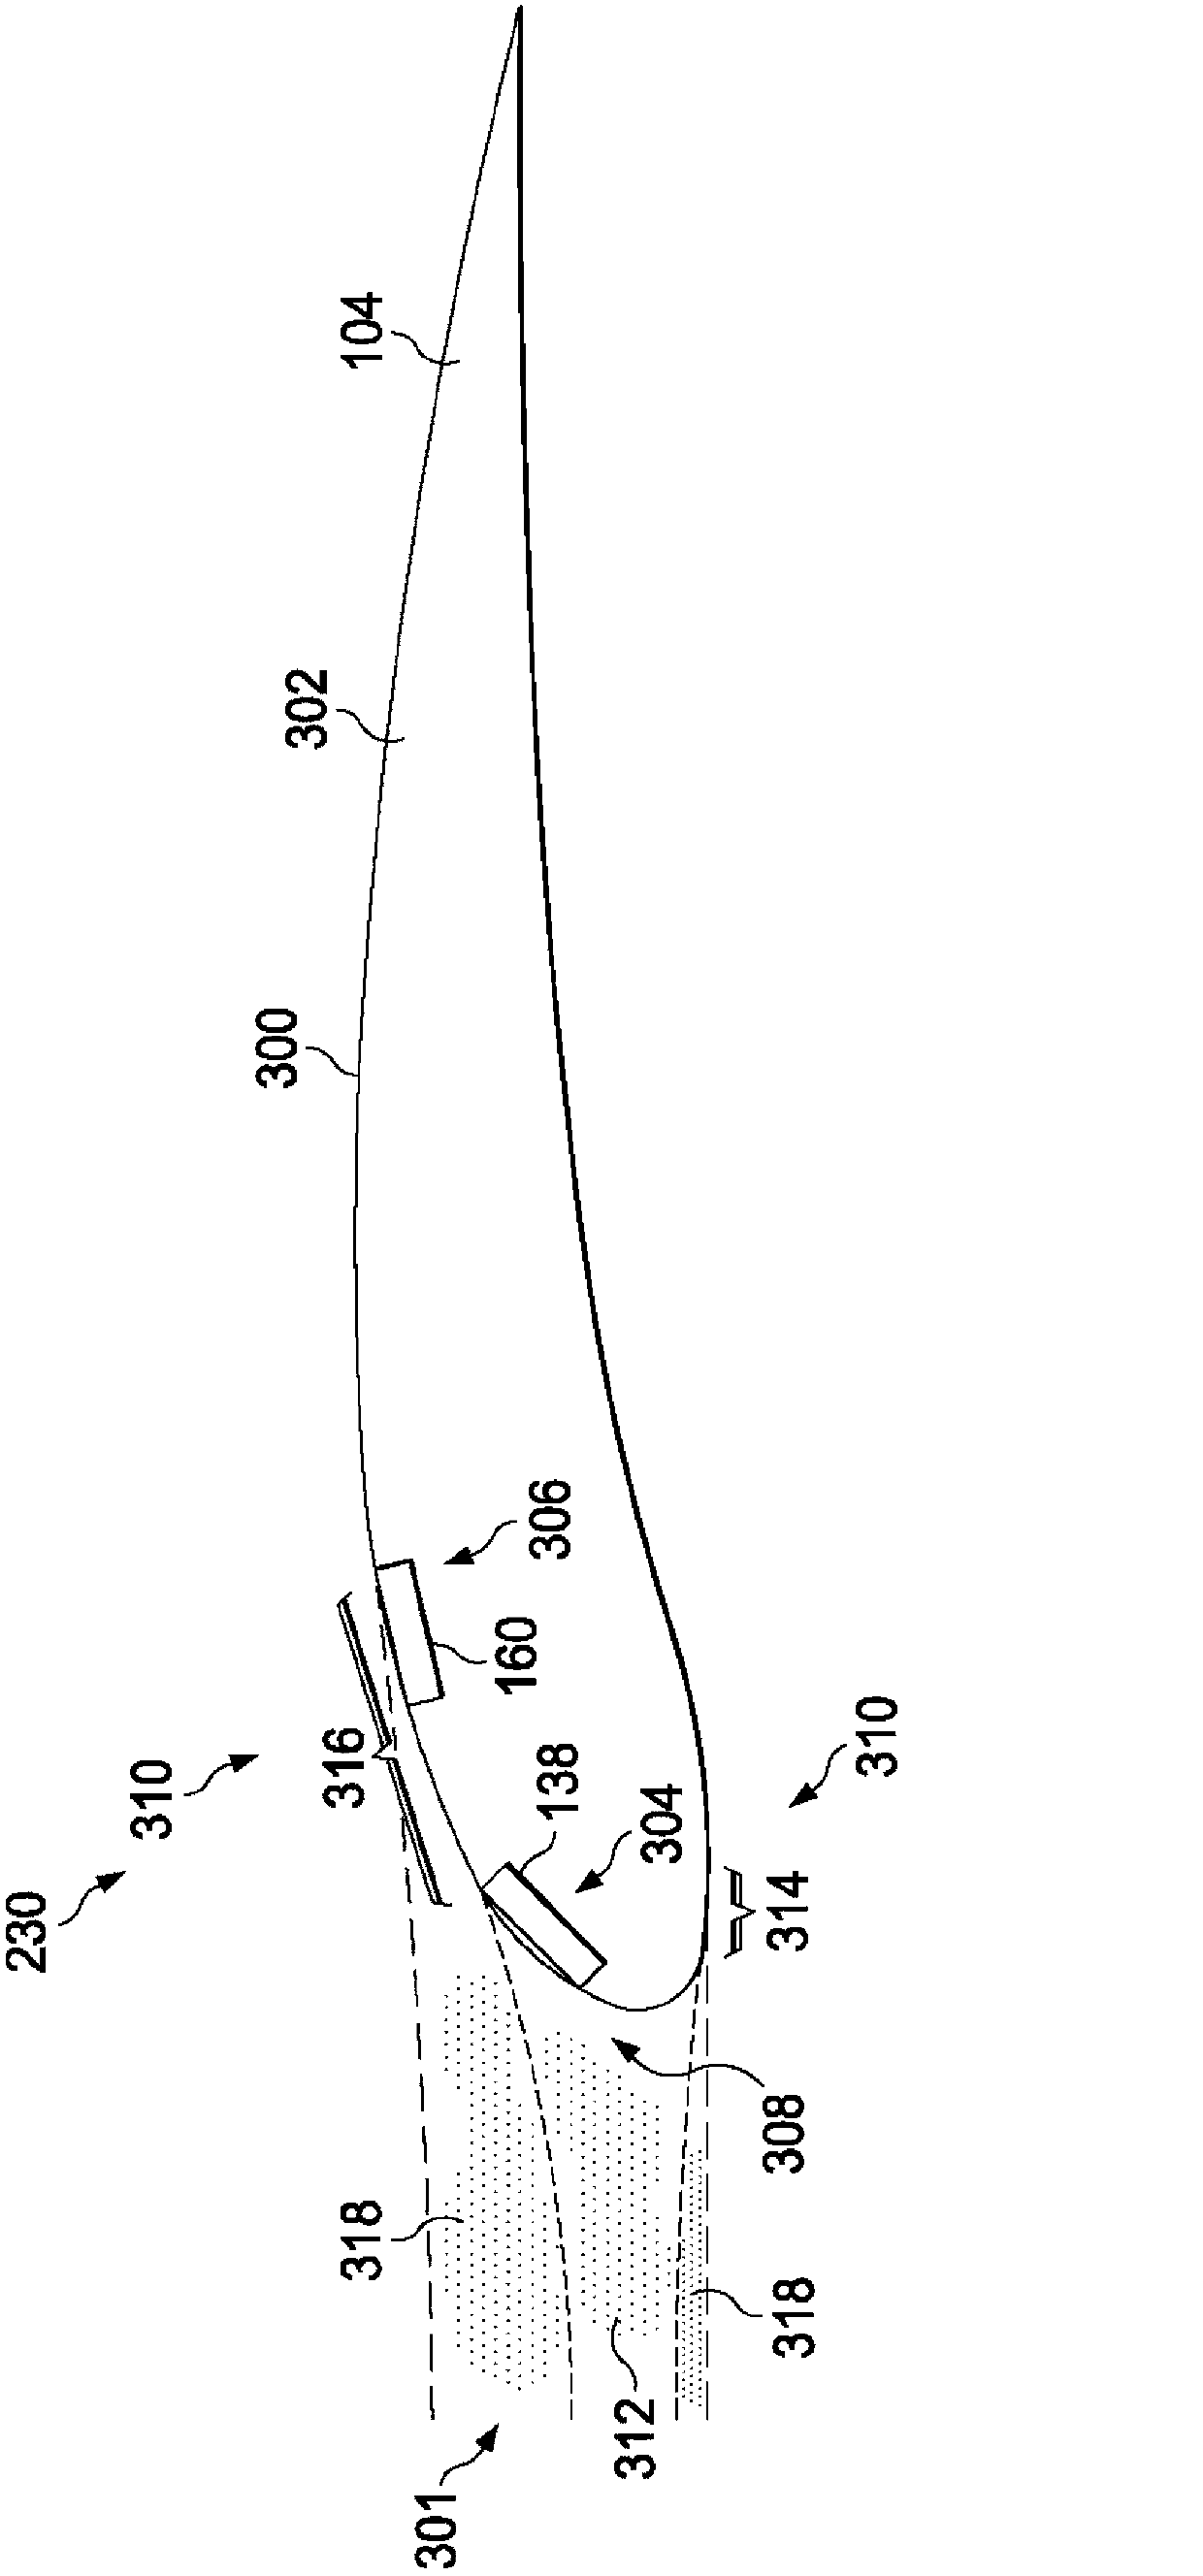 Supercooled large drop icing condition detection system